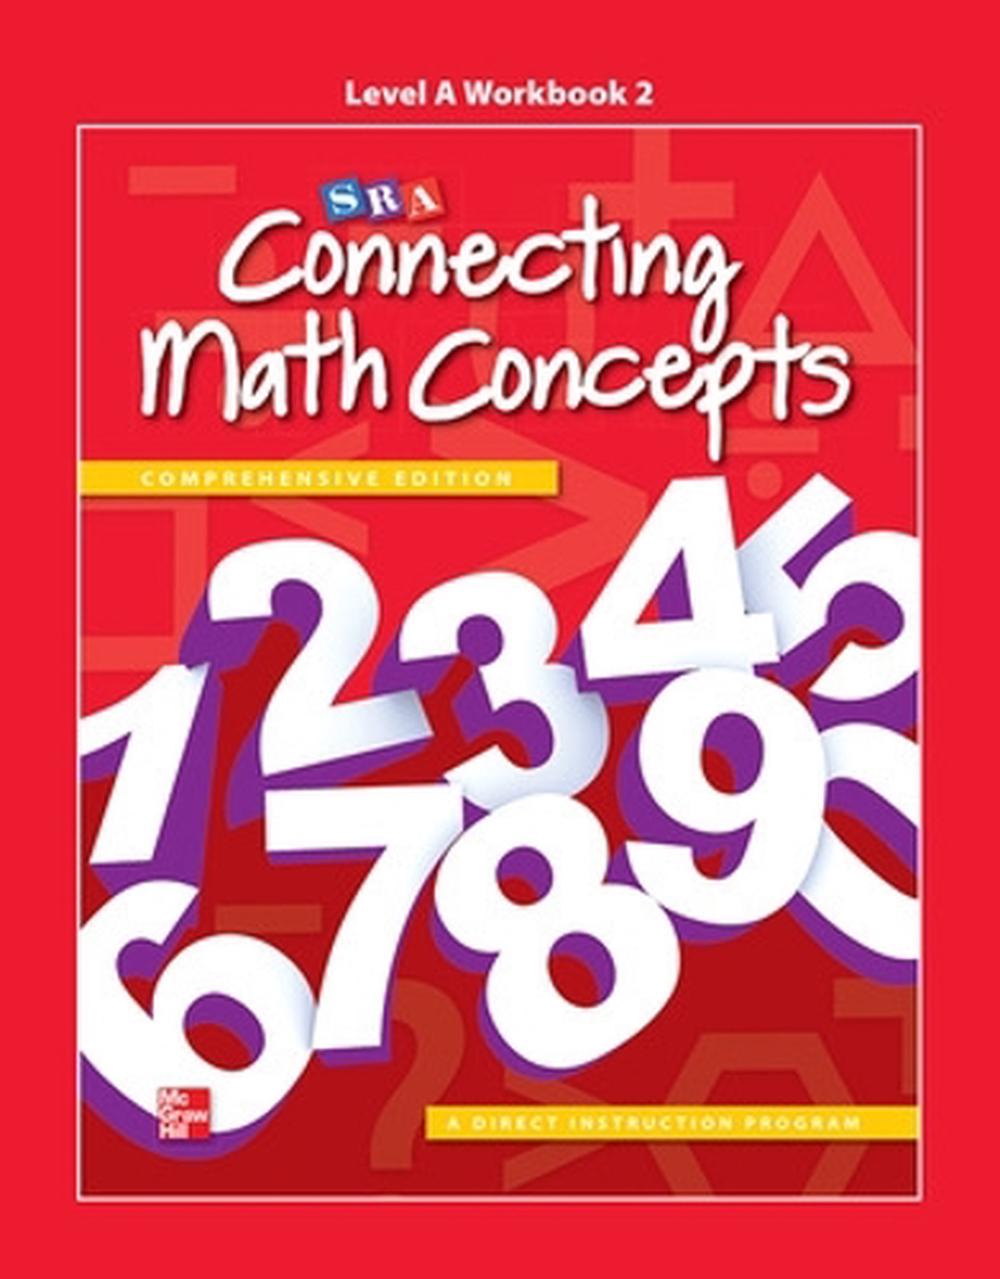 Connecting Math Concepts Level A, Workbook 2 by McGraw-Hill Education